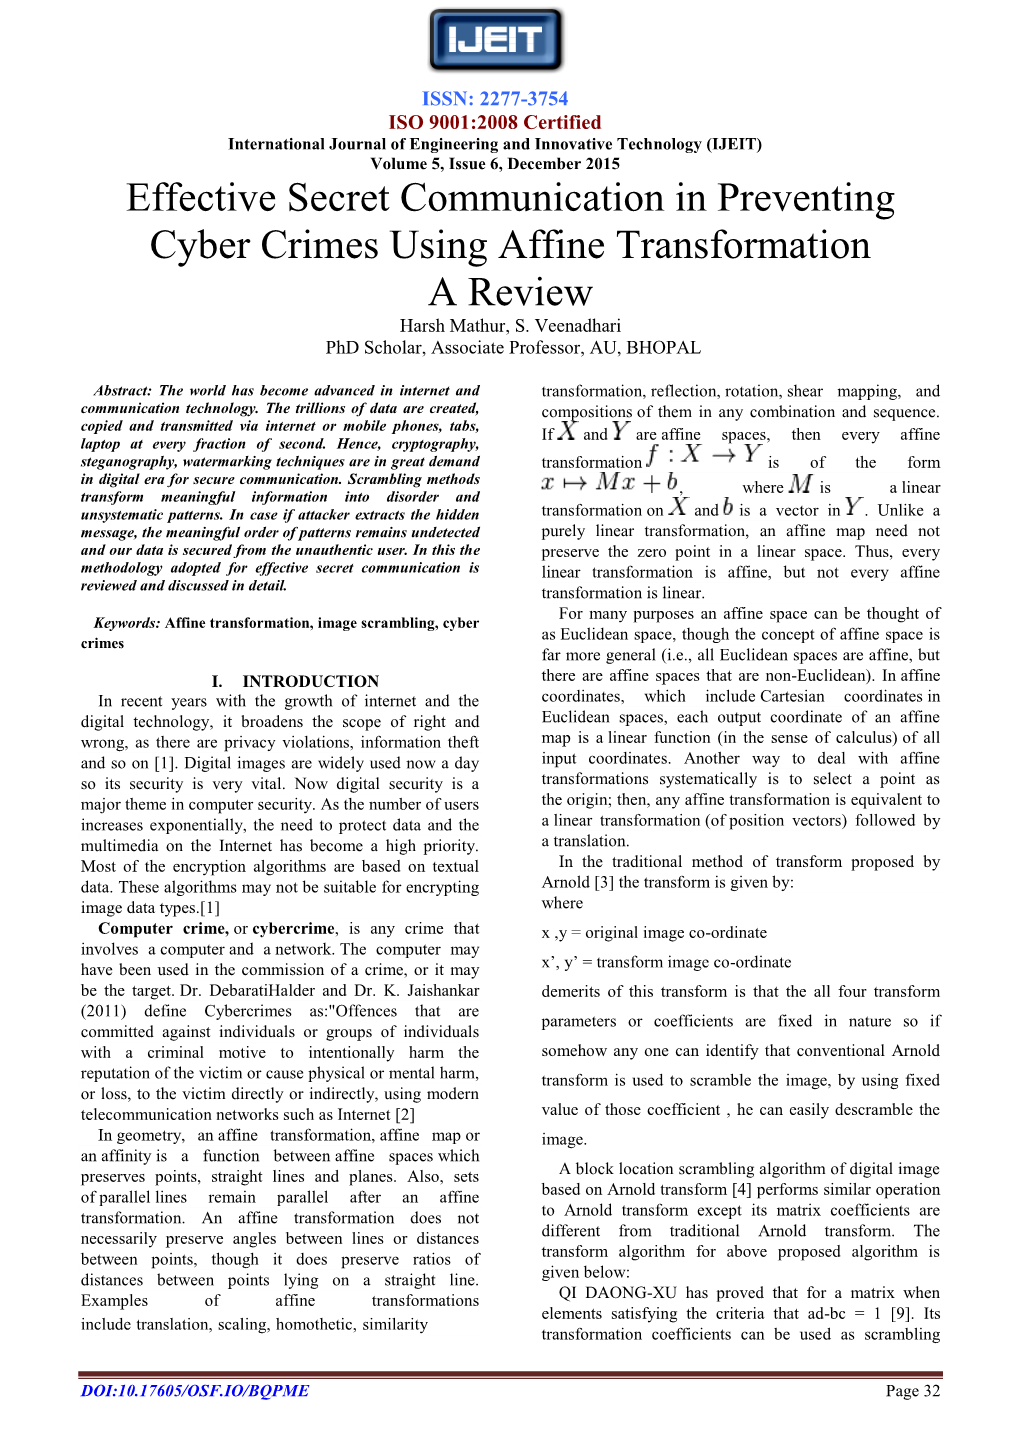 Effective Secret Communication in Preventing Cyber Crimes Using Affine Transformation a Review Harsh Mathur, S